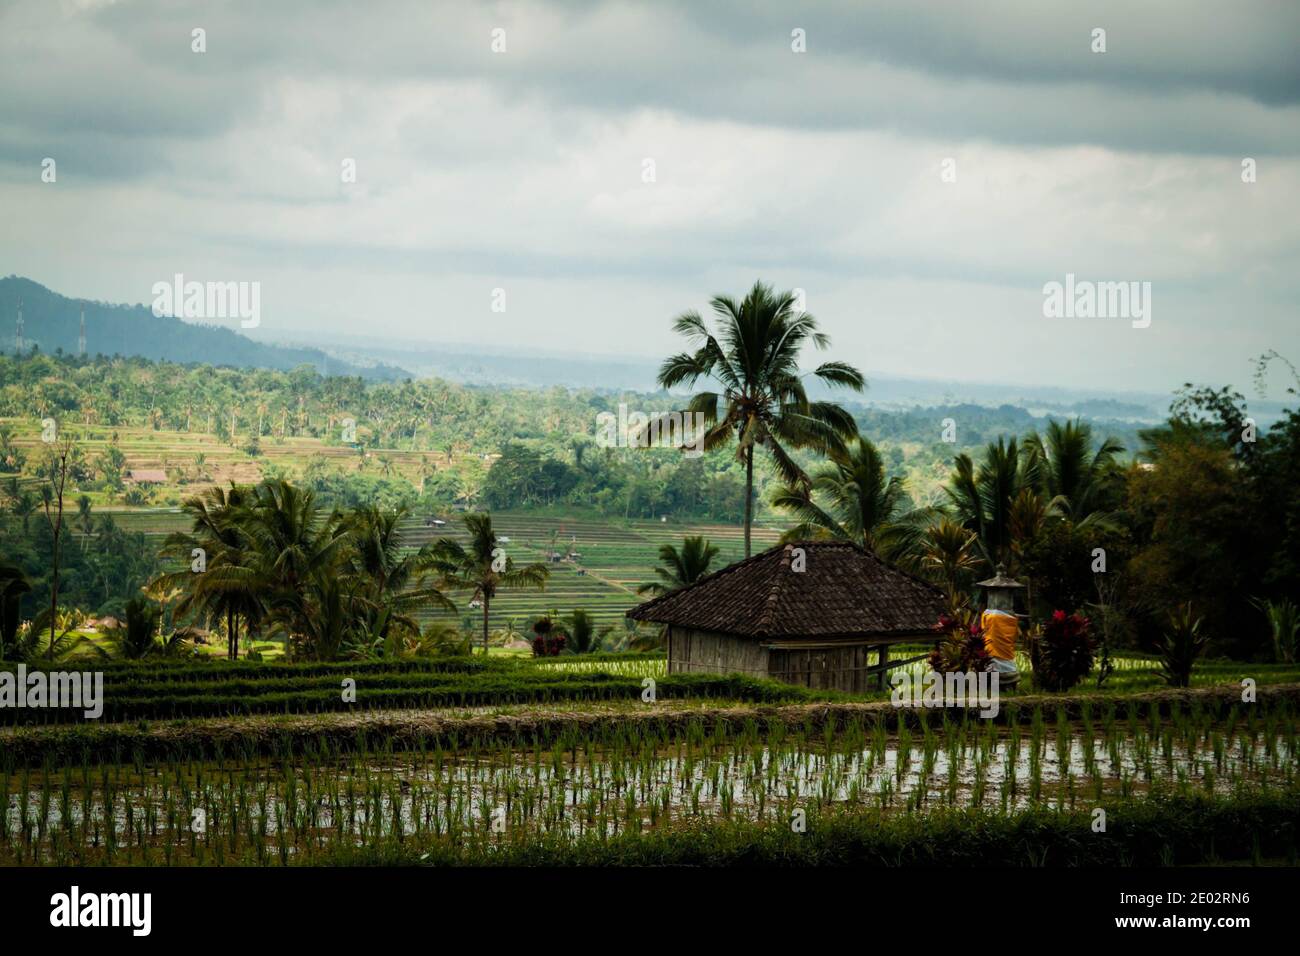 One of the most famous tourist attractions in Bali, Jatiluwih Rice Terrace Stock Photo